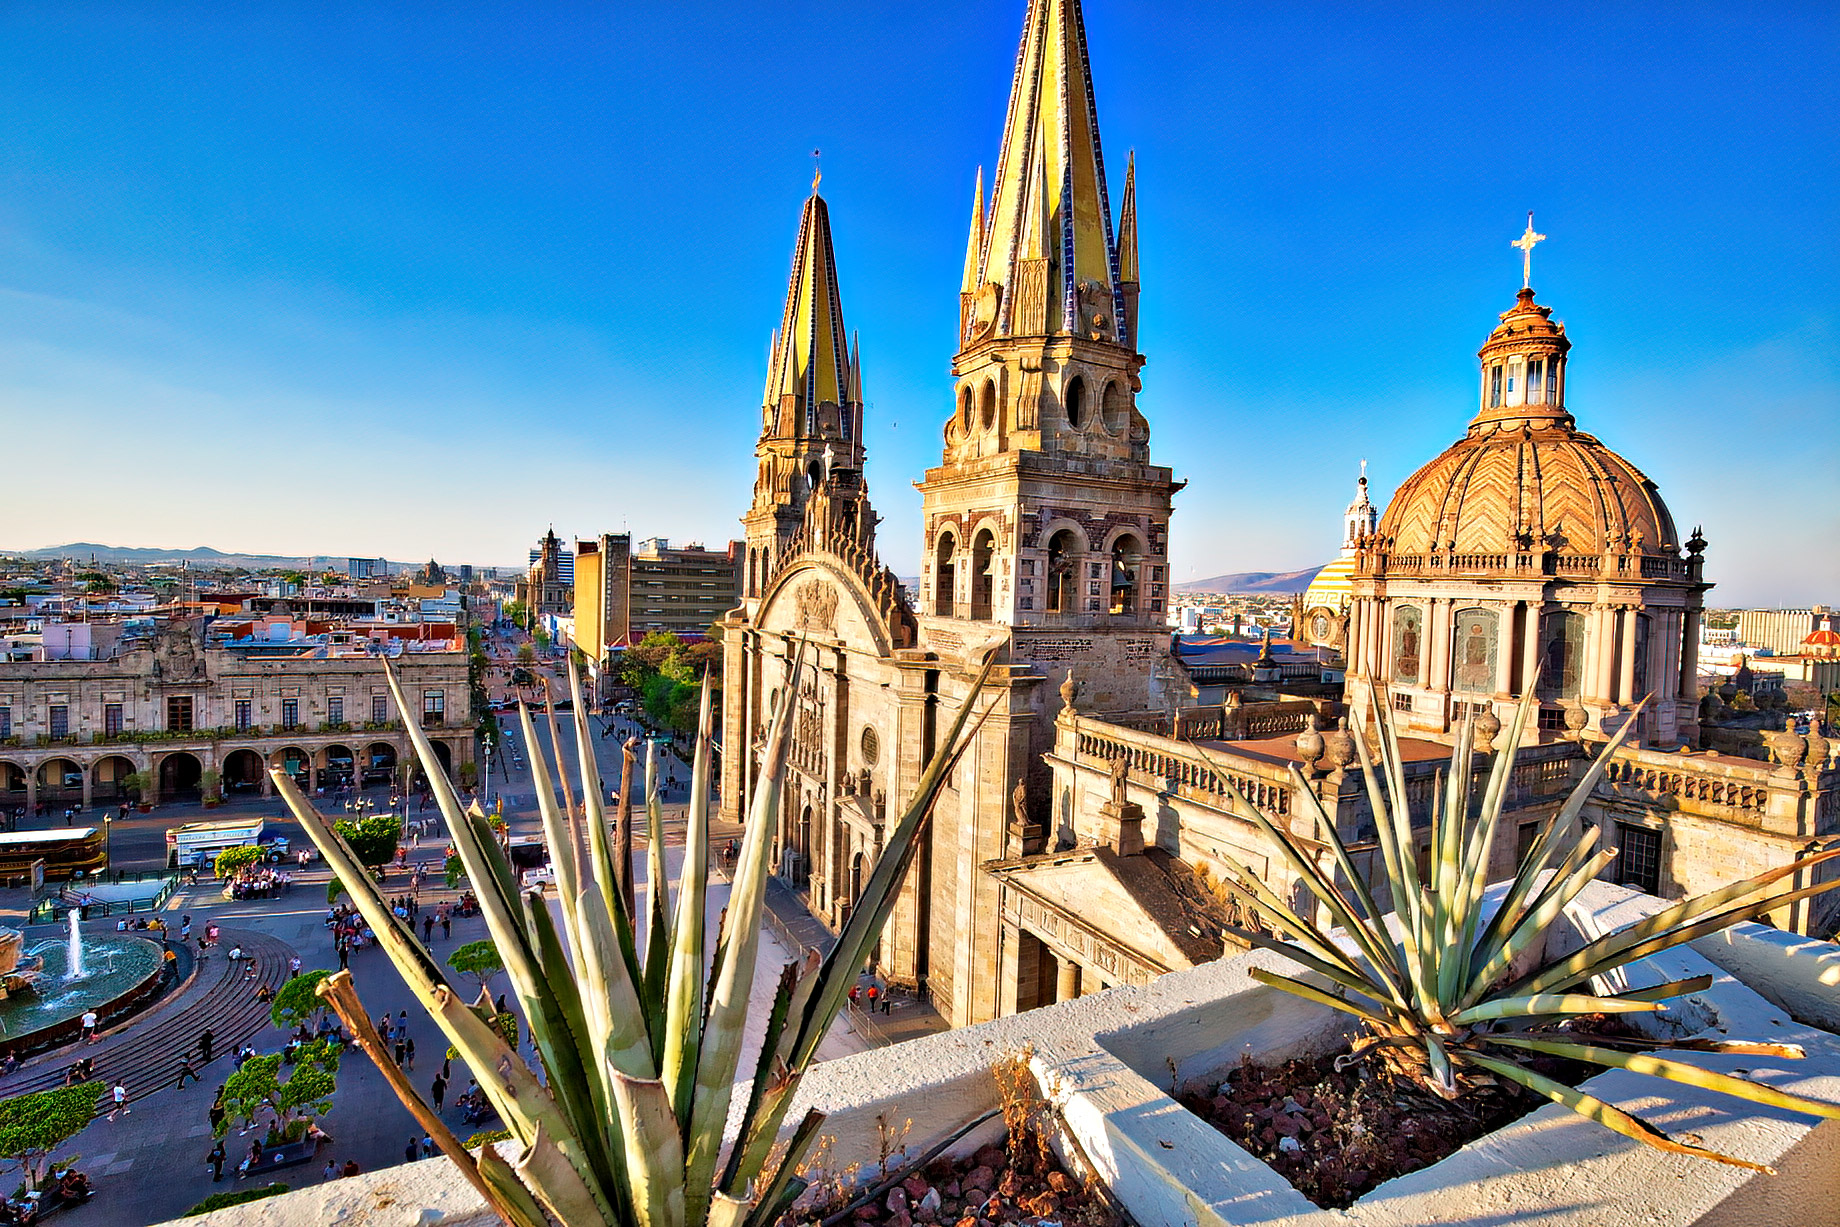 Cathedral of the Assumption of Our Lady - Guadalajara, Jalisco, Mexico